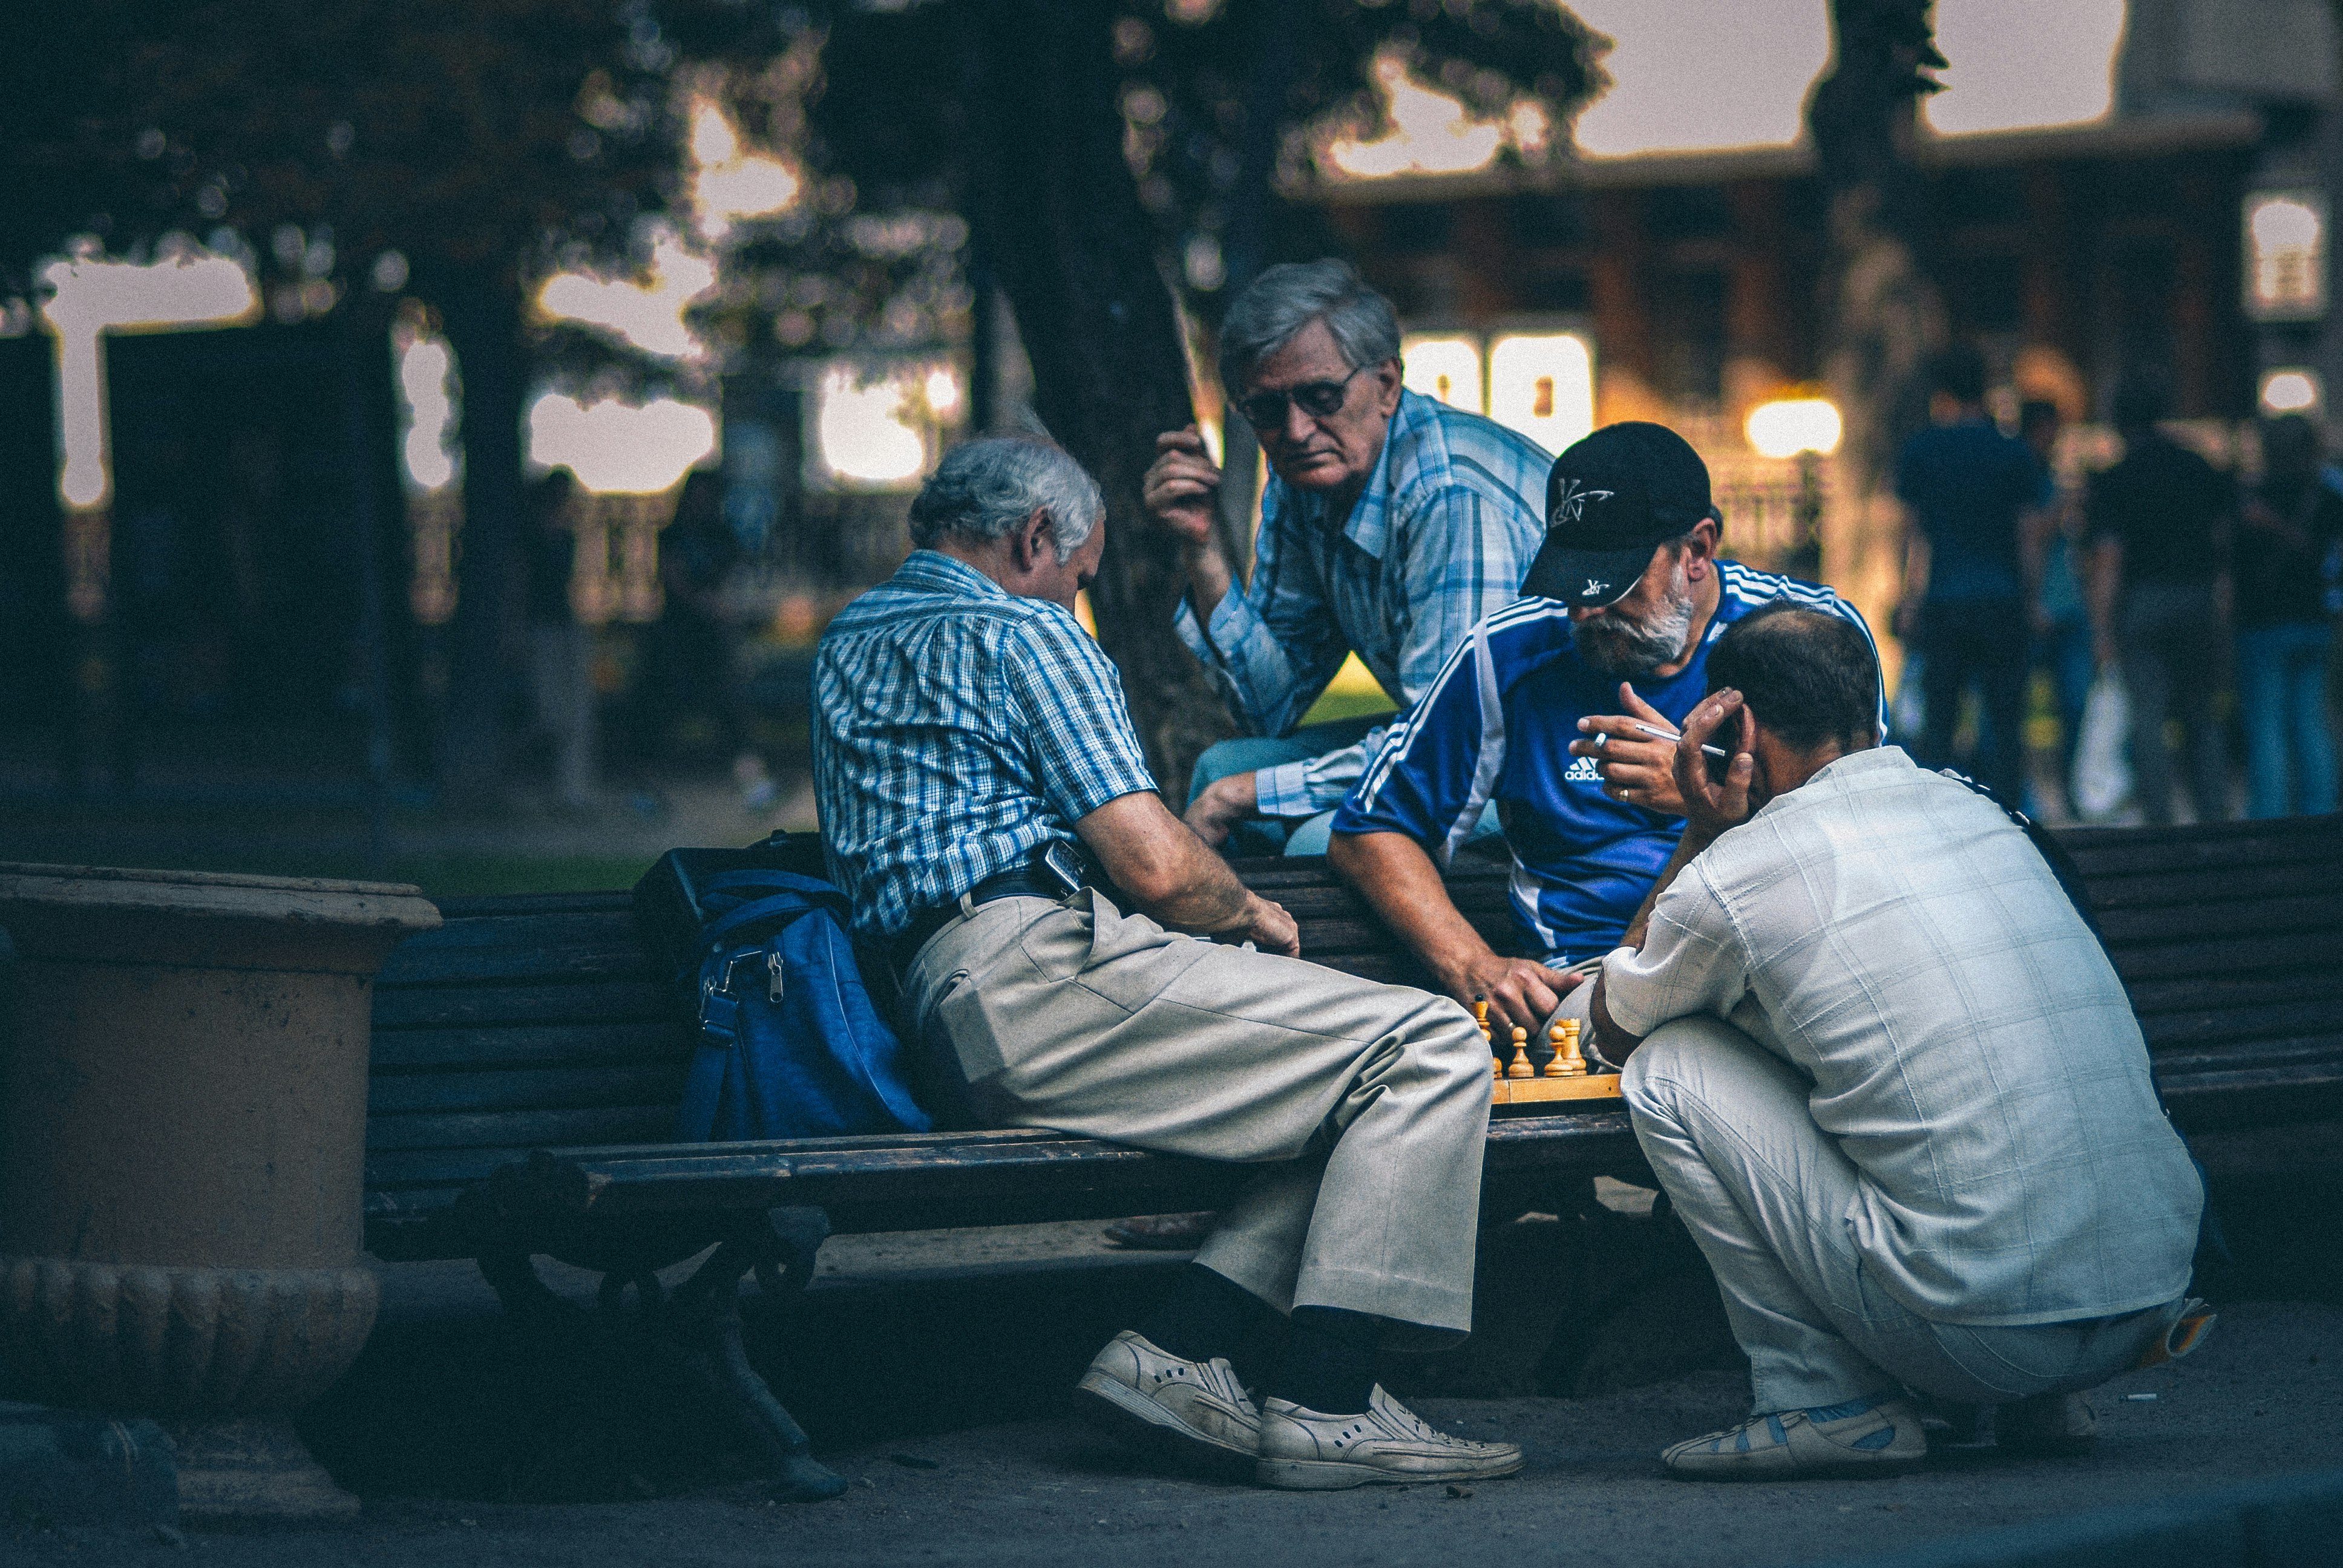 Men play chess on the bench in the park.